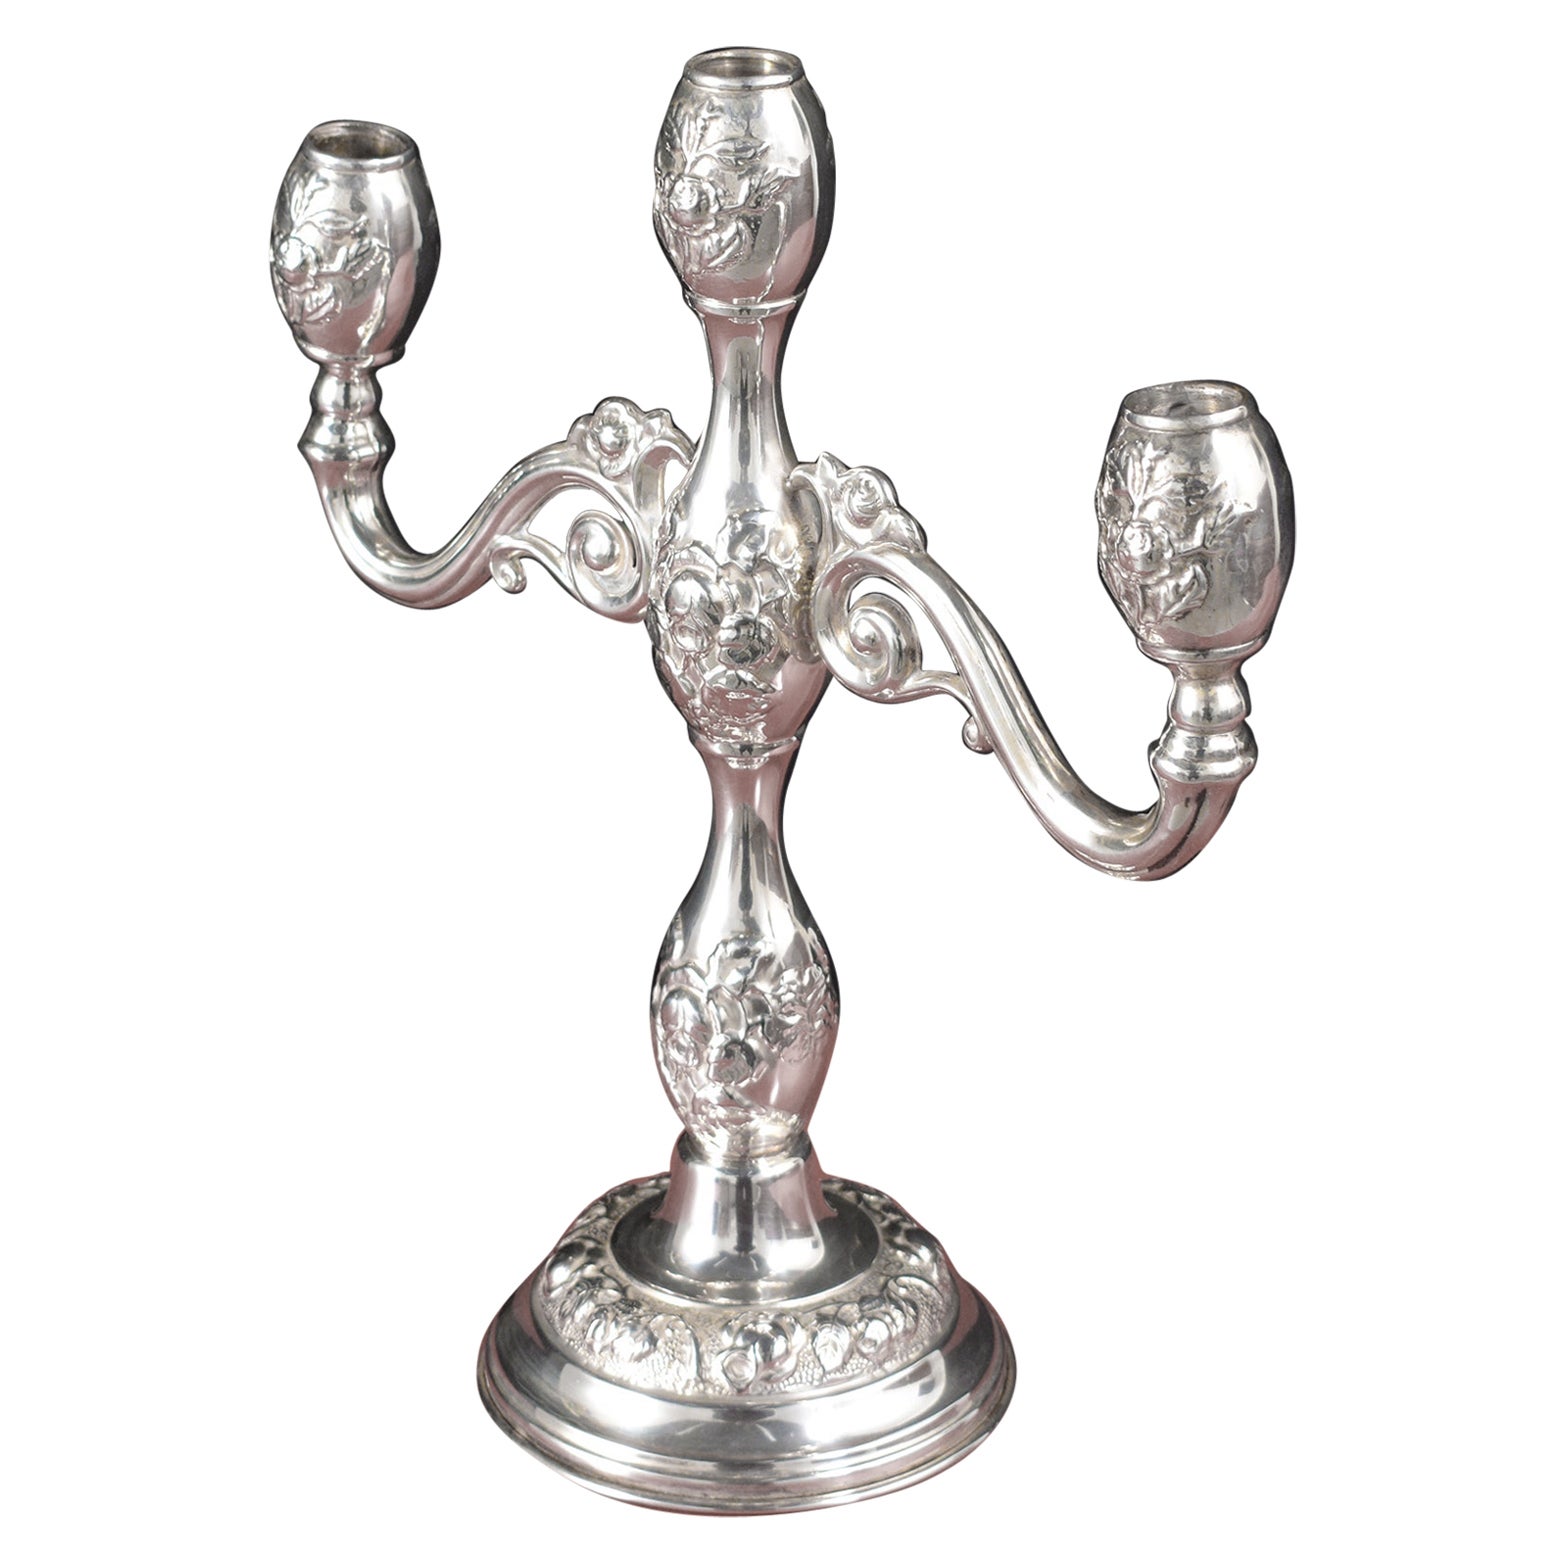 Porte-bougies - Argent sterling